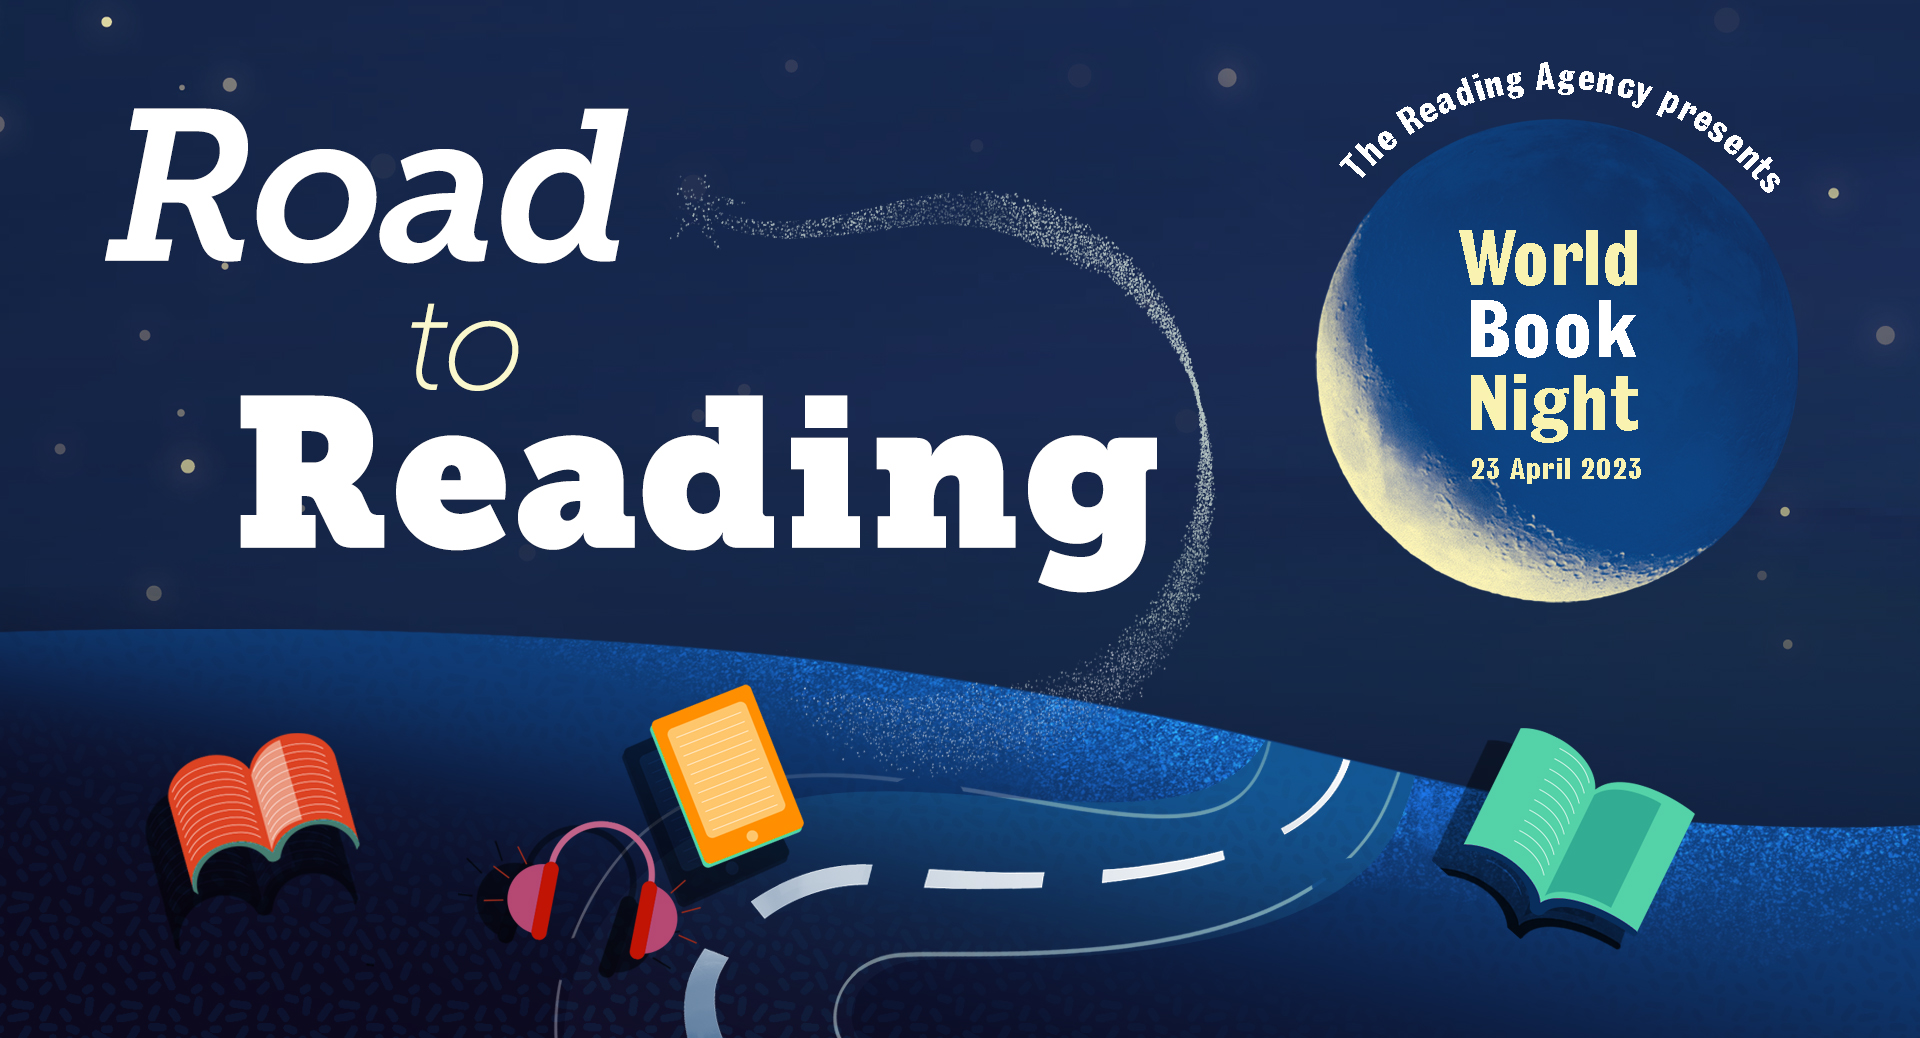 World Book Night banner which has the initiative's logo as well as 'The Road to Reading'.